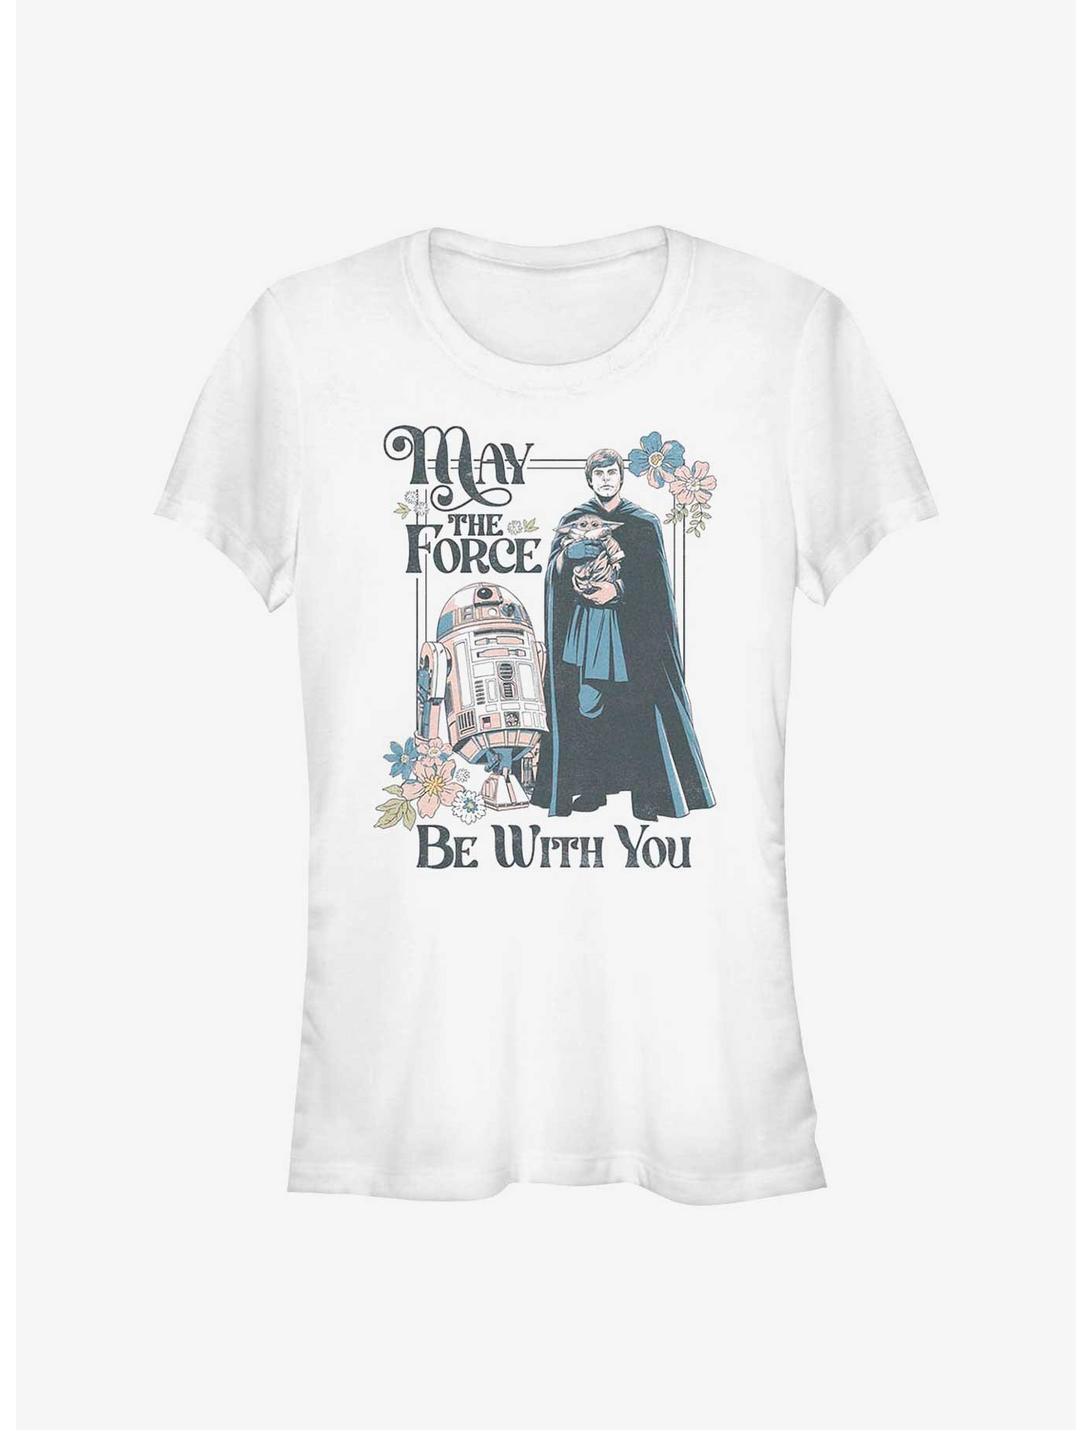 Star Wars The Mandalorian May The Force Be With You Girls T-Shirt, WHITE, hi-res